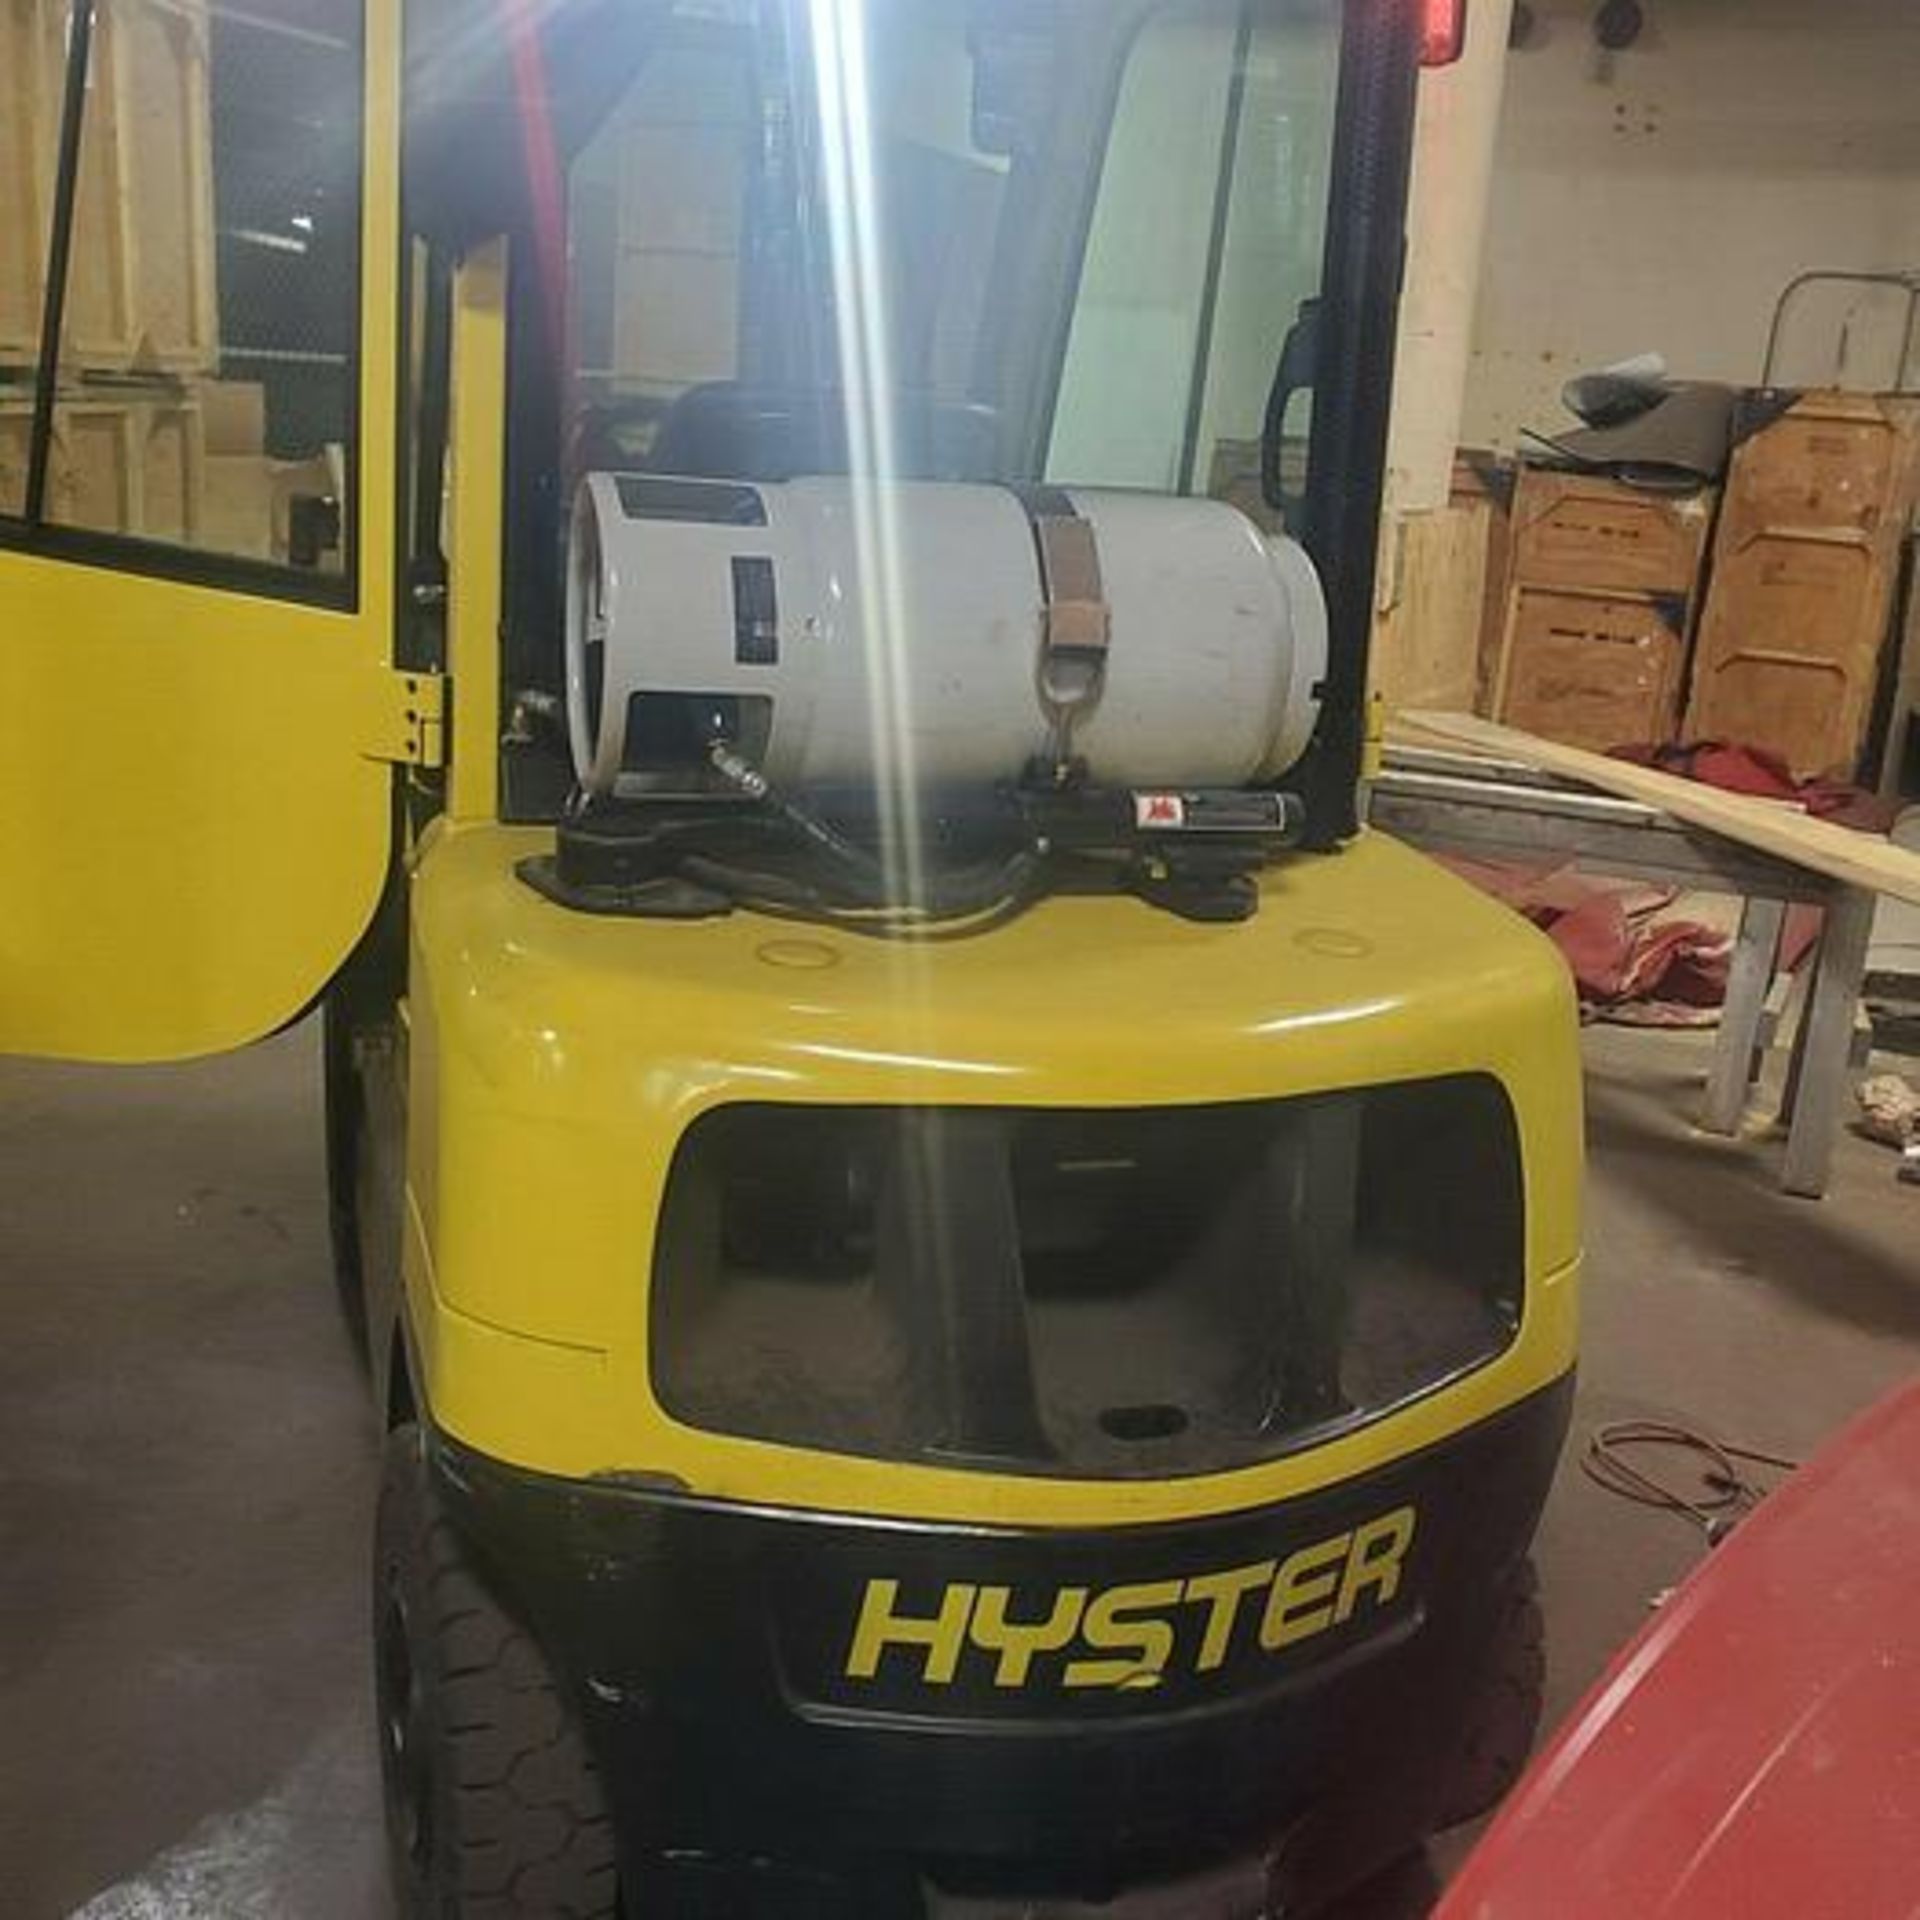 6,000 POUND HYSTER MODEL 60XT PNEUMATIC TIRE FORKLIFT - Image 4 of 8